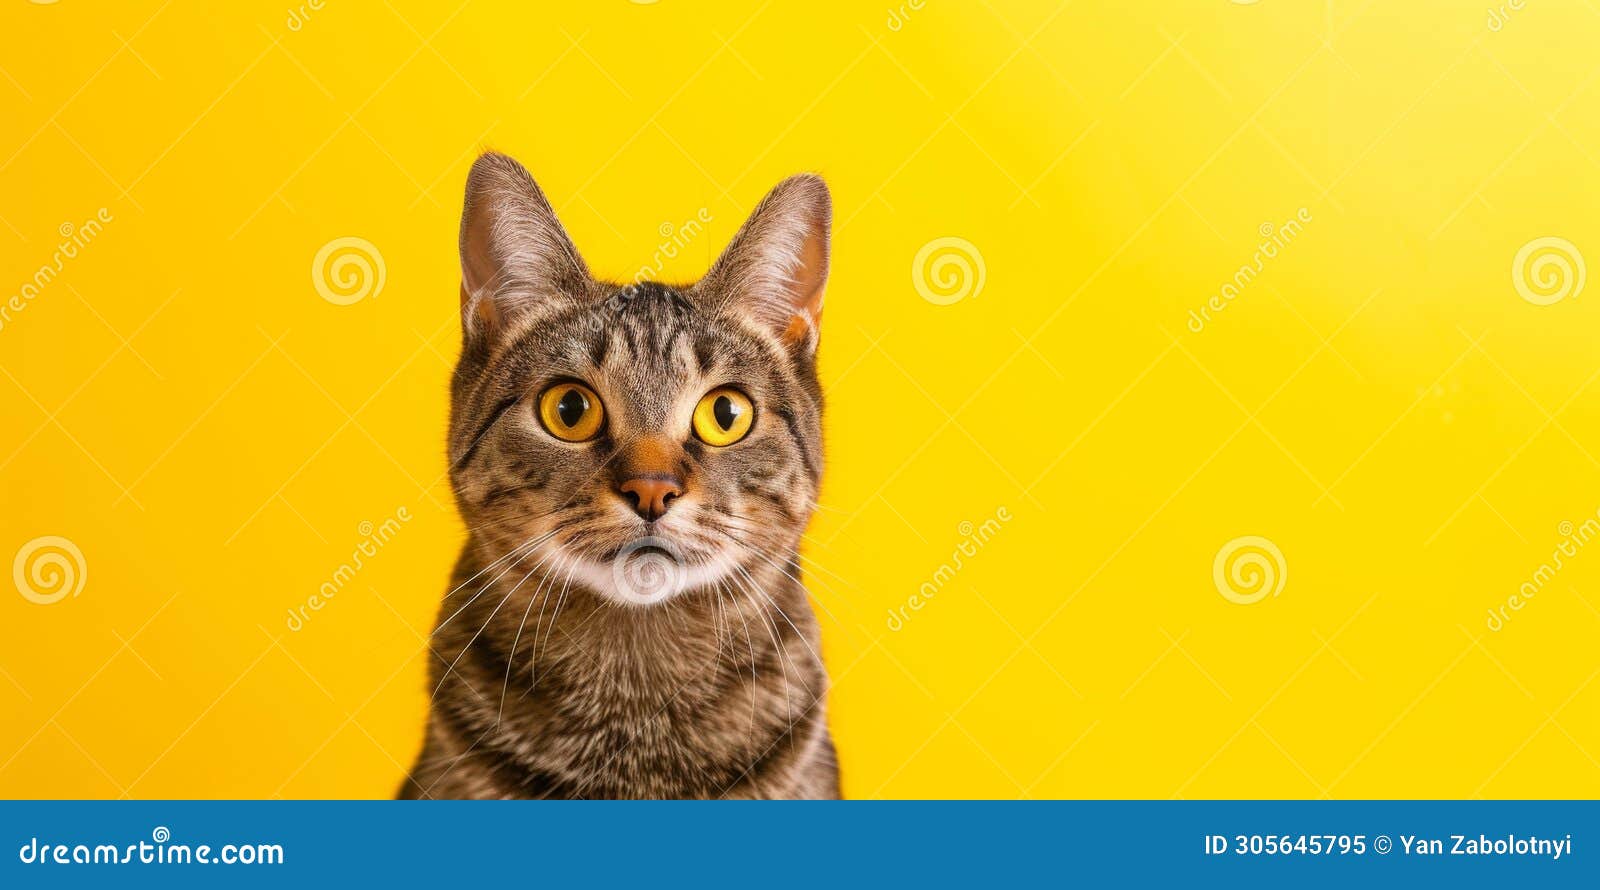 adorable cat banner against vibrant yellow backdrop captures attention instantly